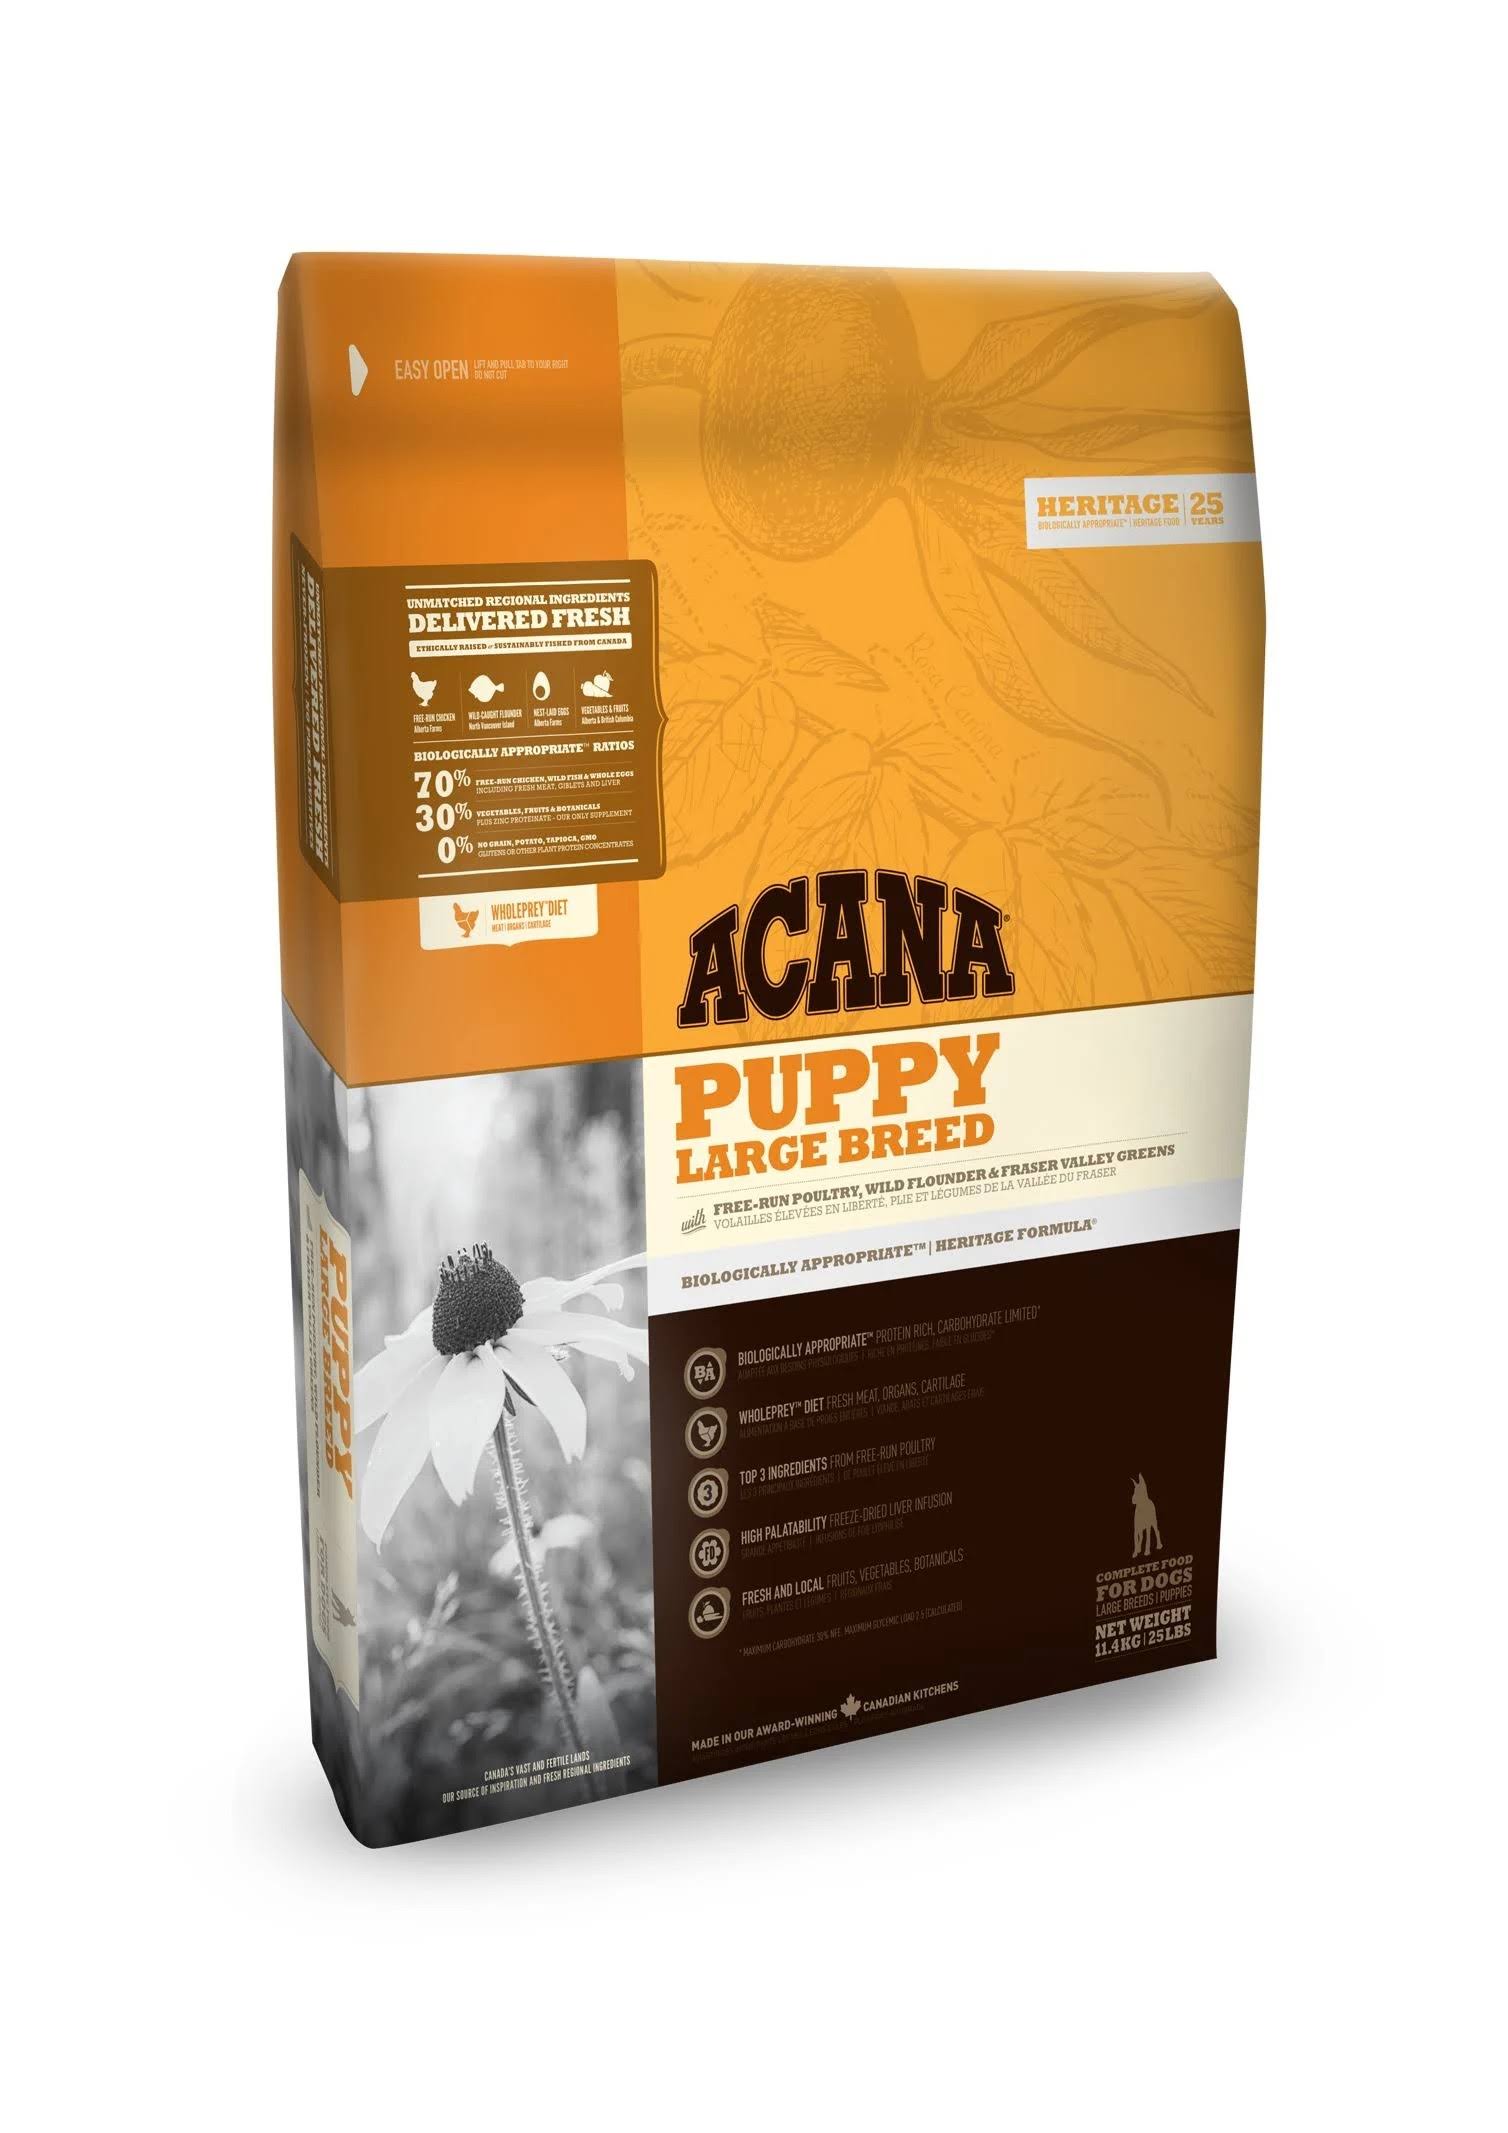 Acana Puppy Large Breed Dog Dry Food - 11.4kg